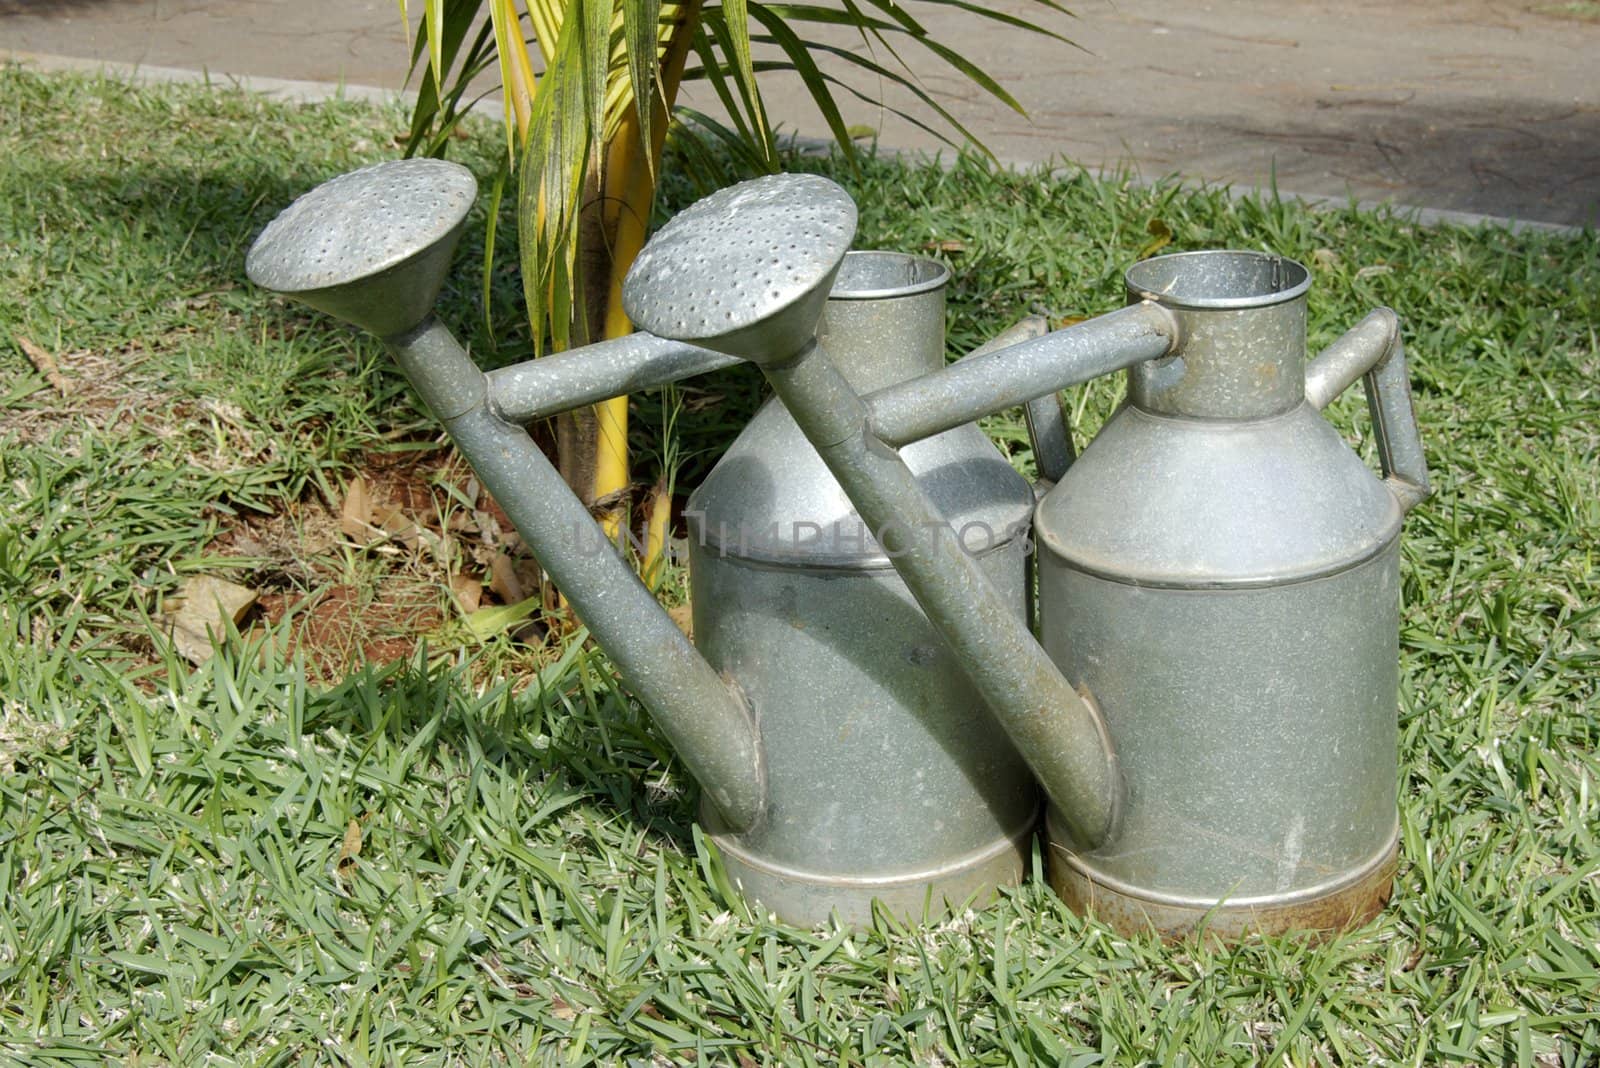 Two metal galvanized watering cans standing on a green lawn